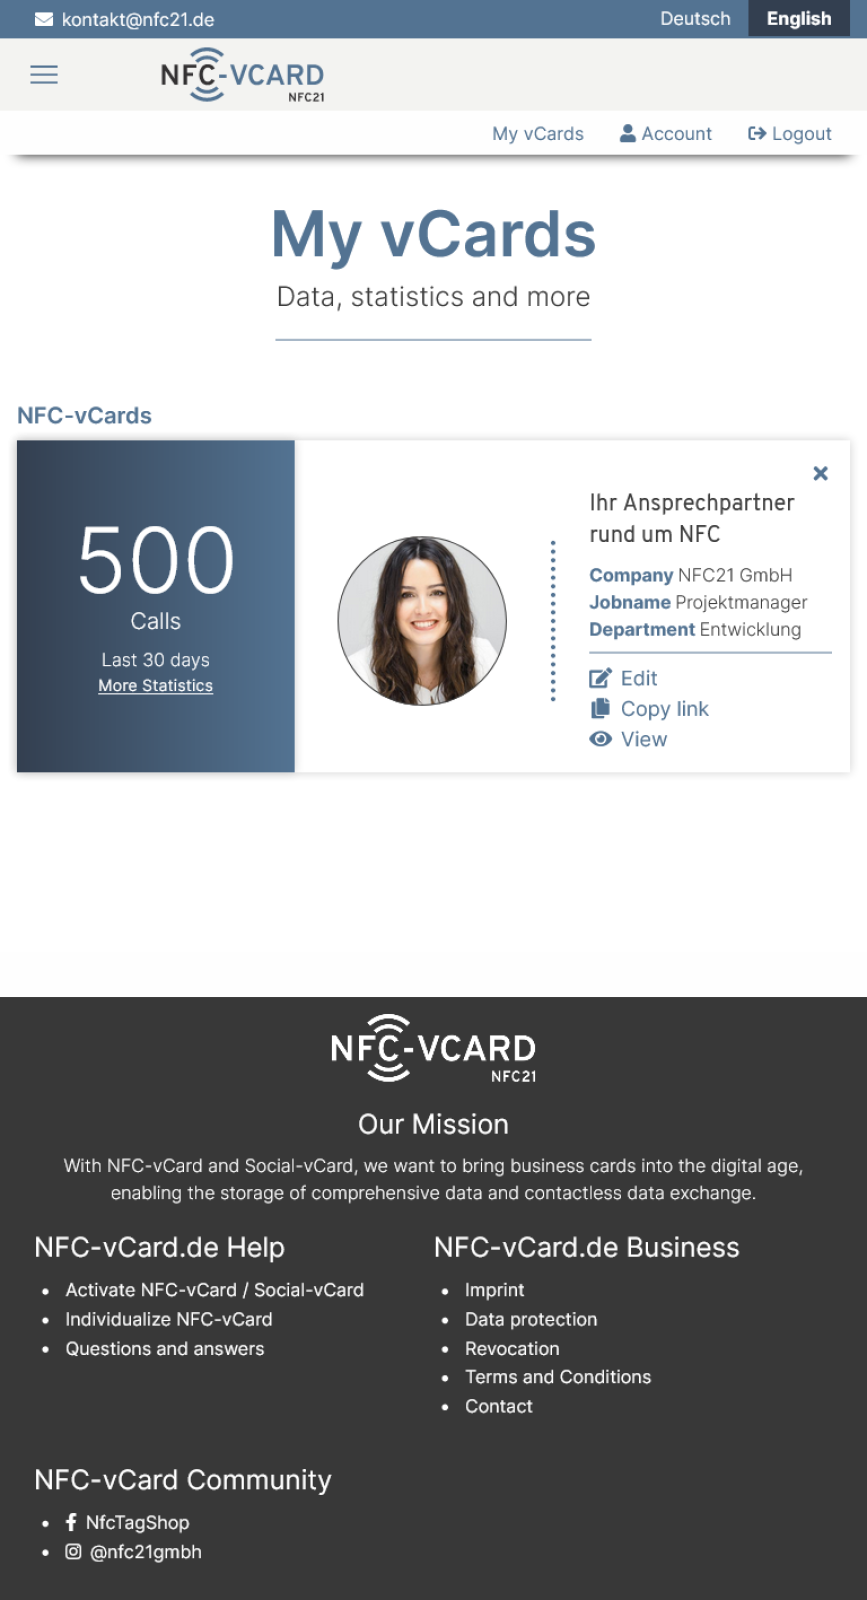 NFC-vCard - Everything at a glance